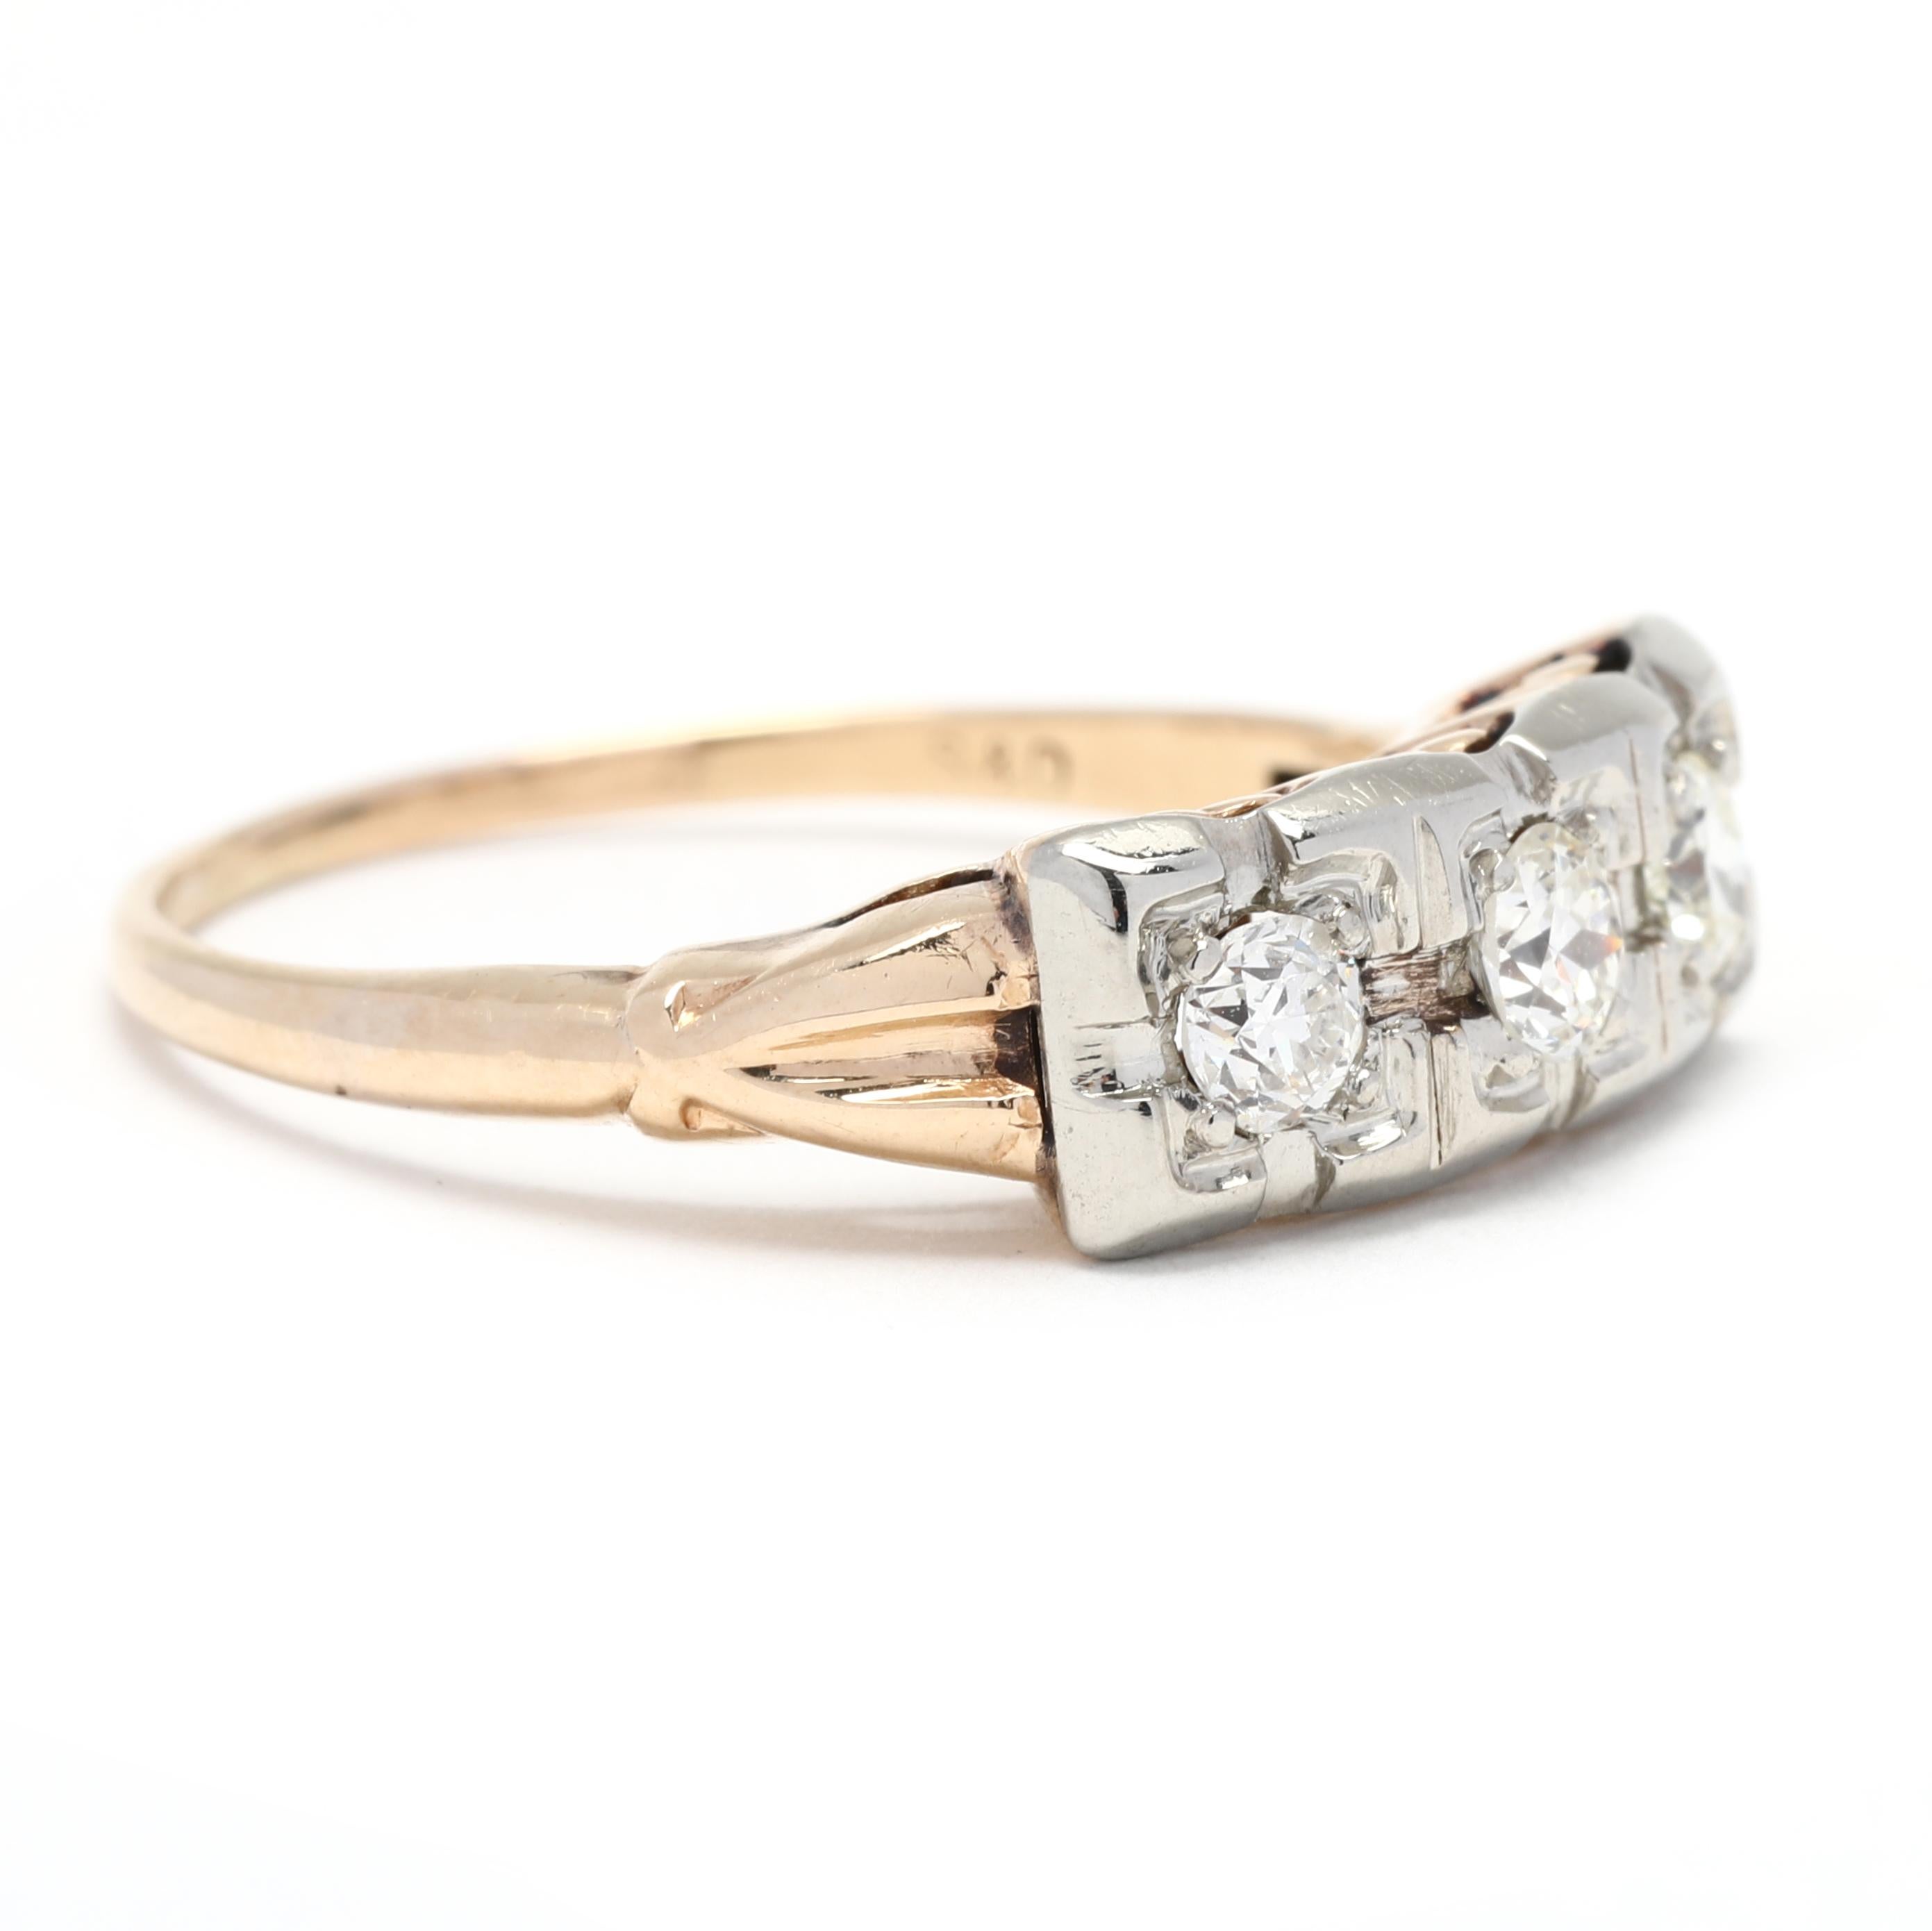 This elegant, vintage three stone engagement ring is a stunning reminder of the past. The ring features three diamonds- two .10ct and one .15ct- set in a feminine 14K yellow gold setting with a subtle split-shank band, the perfect combination of